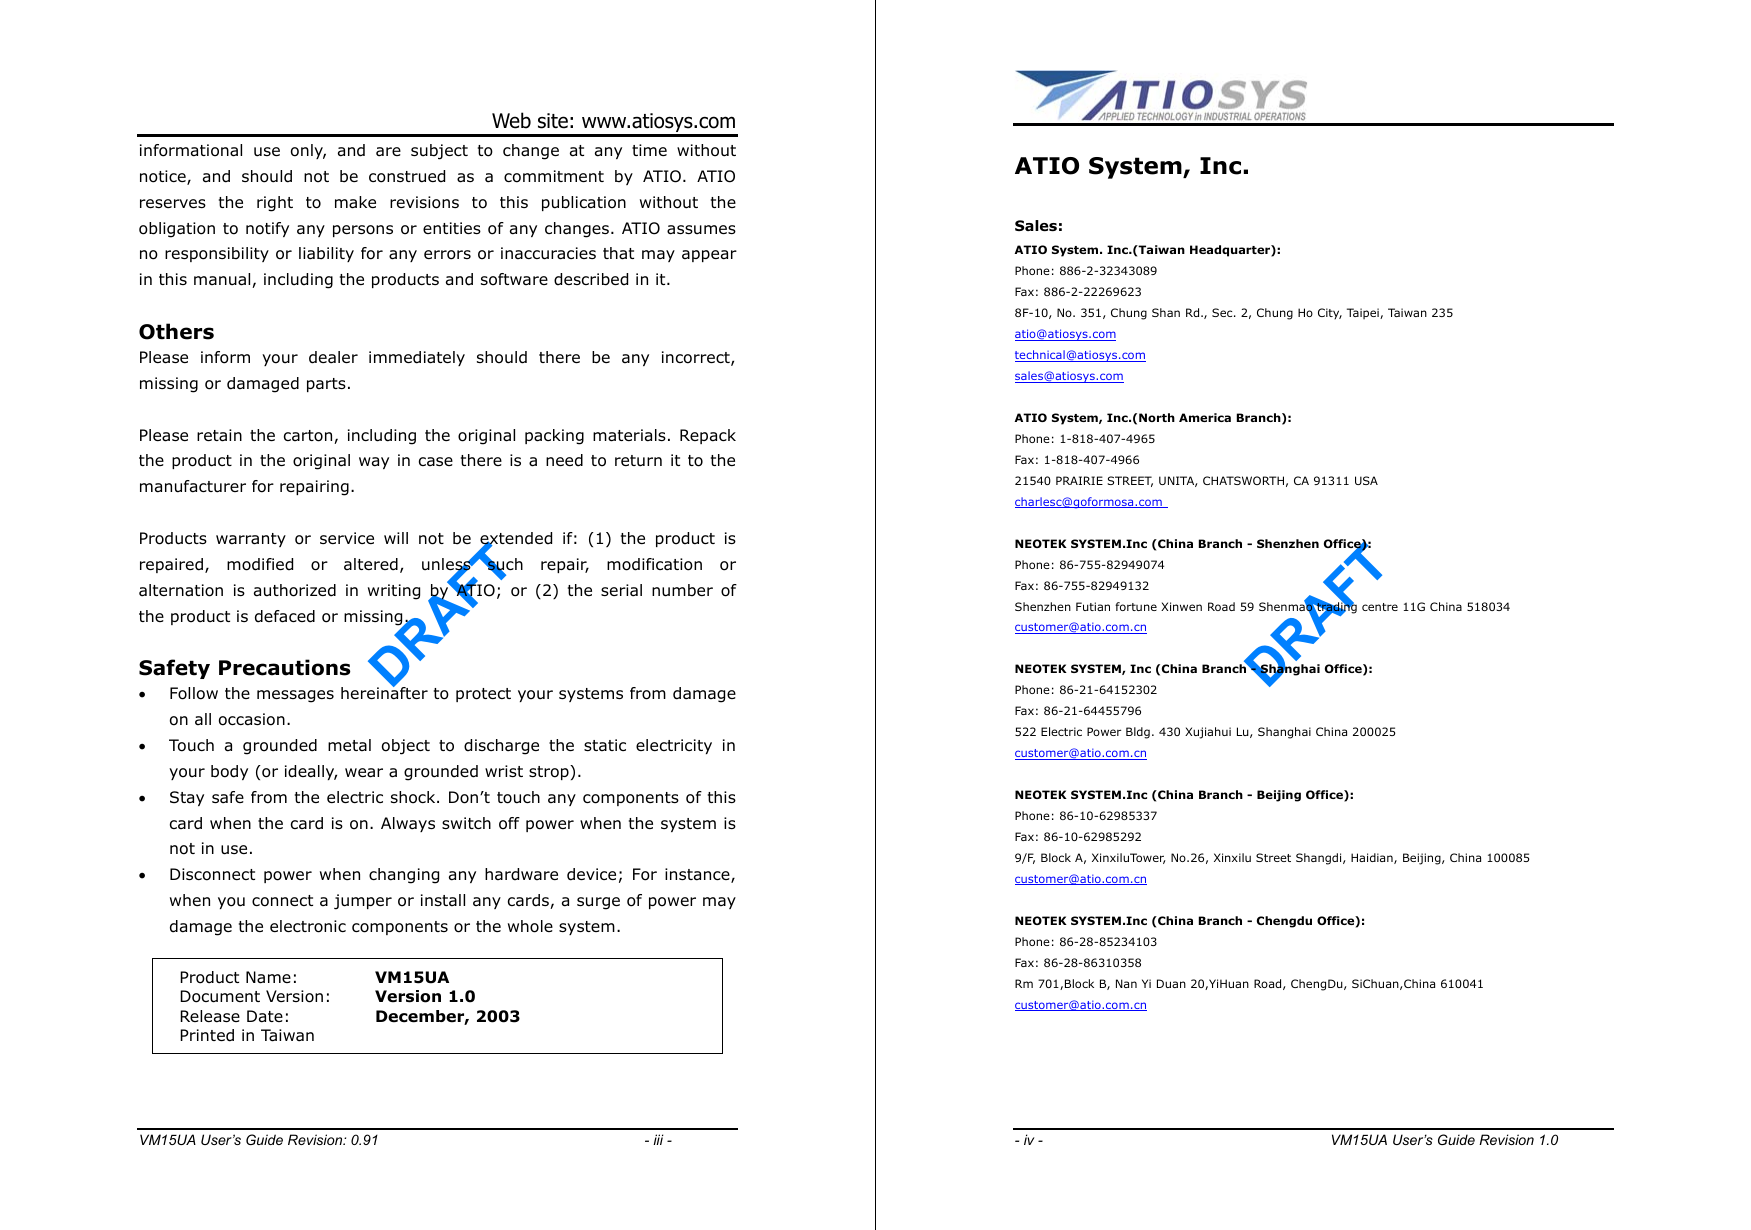 DRAFT Web site: www.atiosys.com VM15UA User’s Guide Revision: 0.91                                     - iii - informational use only, and are subject to change at any time without notice, and should not be construed as a commitment by ATIO. ATIO reserves the right to make revisions to this publication without the obligation to notify any persons or entities of any changes. ATIO assumes no responsibility or liability for any errors or inaccuracies that may appear in this manual, including the products and software described in it.  Others Please inform your dealer immediately should there be any incorrect, missing or damaged parts.  Please retain the carton, including the original packing materials. Repack the product in the original way in case there is a need to return it to the manufacturer for repairing.  Products warranty or service will not be extended if: (1) the product is repaired, modified or altered, unless such repair, modification or alternation is authorized in writing by ATIO; or (2) the serial number of the product is defaced or missing.  Safety Precautions •  Follow the messages hereinafter to protect your systems from damage on all occasion. •  Touch a grounded metal object to discharge the static electricity in your body (or ideally, wear a grounded wrist strop). •  Stay safe from the electric shock. Don’t touch any components of this card when the card is on. Always switch off power when the system is not in use. •  Disconnect power when changing any hardware device; For instance, when you connect a jumper or install any cards, a surge of power may damage the electronic components or the whole system.    Product Name:  VM15UA Document Version:  Version 1.0 Release Date:  December, 2003 Printed in Taiwan     DRAFT - iv -                                        VM15UA User’s Guide Revision 1.0  ATIO System, Inc.  Sales: ATIO System. Inc.(Taiwan Headquarter): Phone: 886-2-32343089 Fax: 886-2-22269623 8F-10, No. 351, Chung Shan Rd., Sec. 2, Chung Ho City, Taipei, Taiwan 235 atio@atiosys.com technical@atiosys.com sales@atiosys.com  ATIO System, Inc.(North America Branch): Phone: 1-818-407-4965 Fax: 1-818-407-4966   21540 PRAIRIE STREET, UNITA, CHATSWORTH, CA 91311 USA charlesc@goformosa.com    NEOTEK SYSTEM.Inc (China Branch - Shenzhen Office): Phone: 86-755-82949074 Fax: 86-755-82949132 Shenzhen Futian fortune Xinwen Road 59 Shenmao trading centre 11G China 518034   customer@atio.com.cn  NEOTEK SYSTEM, Inc (China Branch - Shanghai Office): Phone: 86-21-64152302 Fax: 86-21-64455796   522 Electric Power Bldg. 430 Xujiahui Lu, Shanghai China 200025 customer@atio.com.cn  NEOTEK SYSTEM.Inc (China Branch - Beijing Office): Phone: 86-10-62985337 Fax: 86-10-62985292   9/F, Block A, XinxiluTower, No.26, Xinxilu Street Shangdi, Haidian, Beijing, China 100085 customer@atio.com.cn  NEOTEK SYSTEM.Inc (China Branch - Chengdu Office): Phone: 86-28-85234103 Fax: 86-28-86310358 Rm 701,Block B, Nan Yi Duan 20,YiHuan Road, ChengDu, SiChuan,China 610041  customer@atio.com.cn     